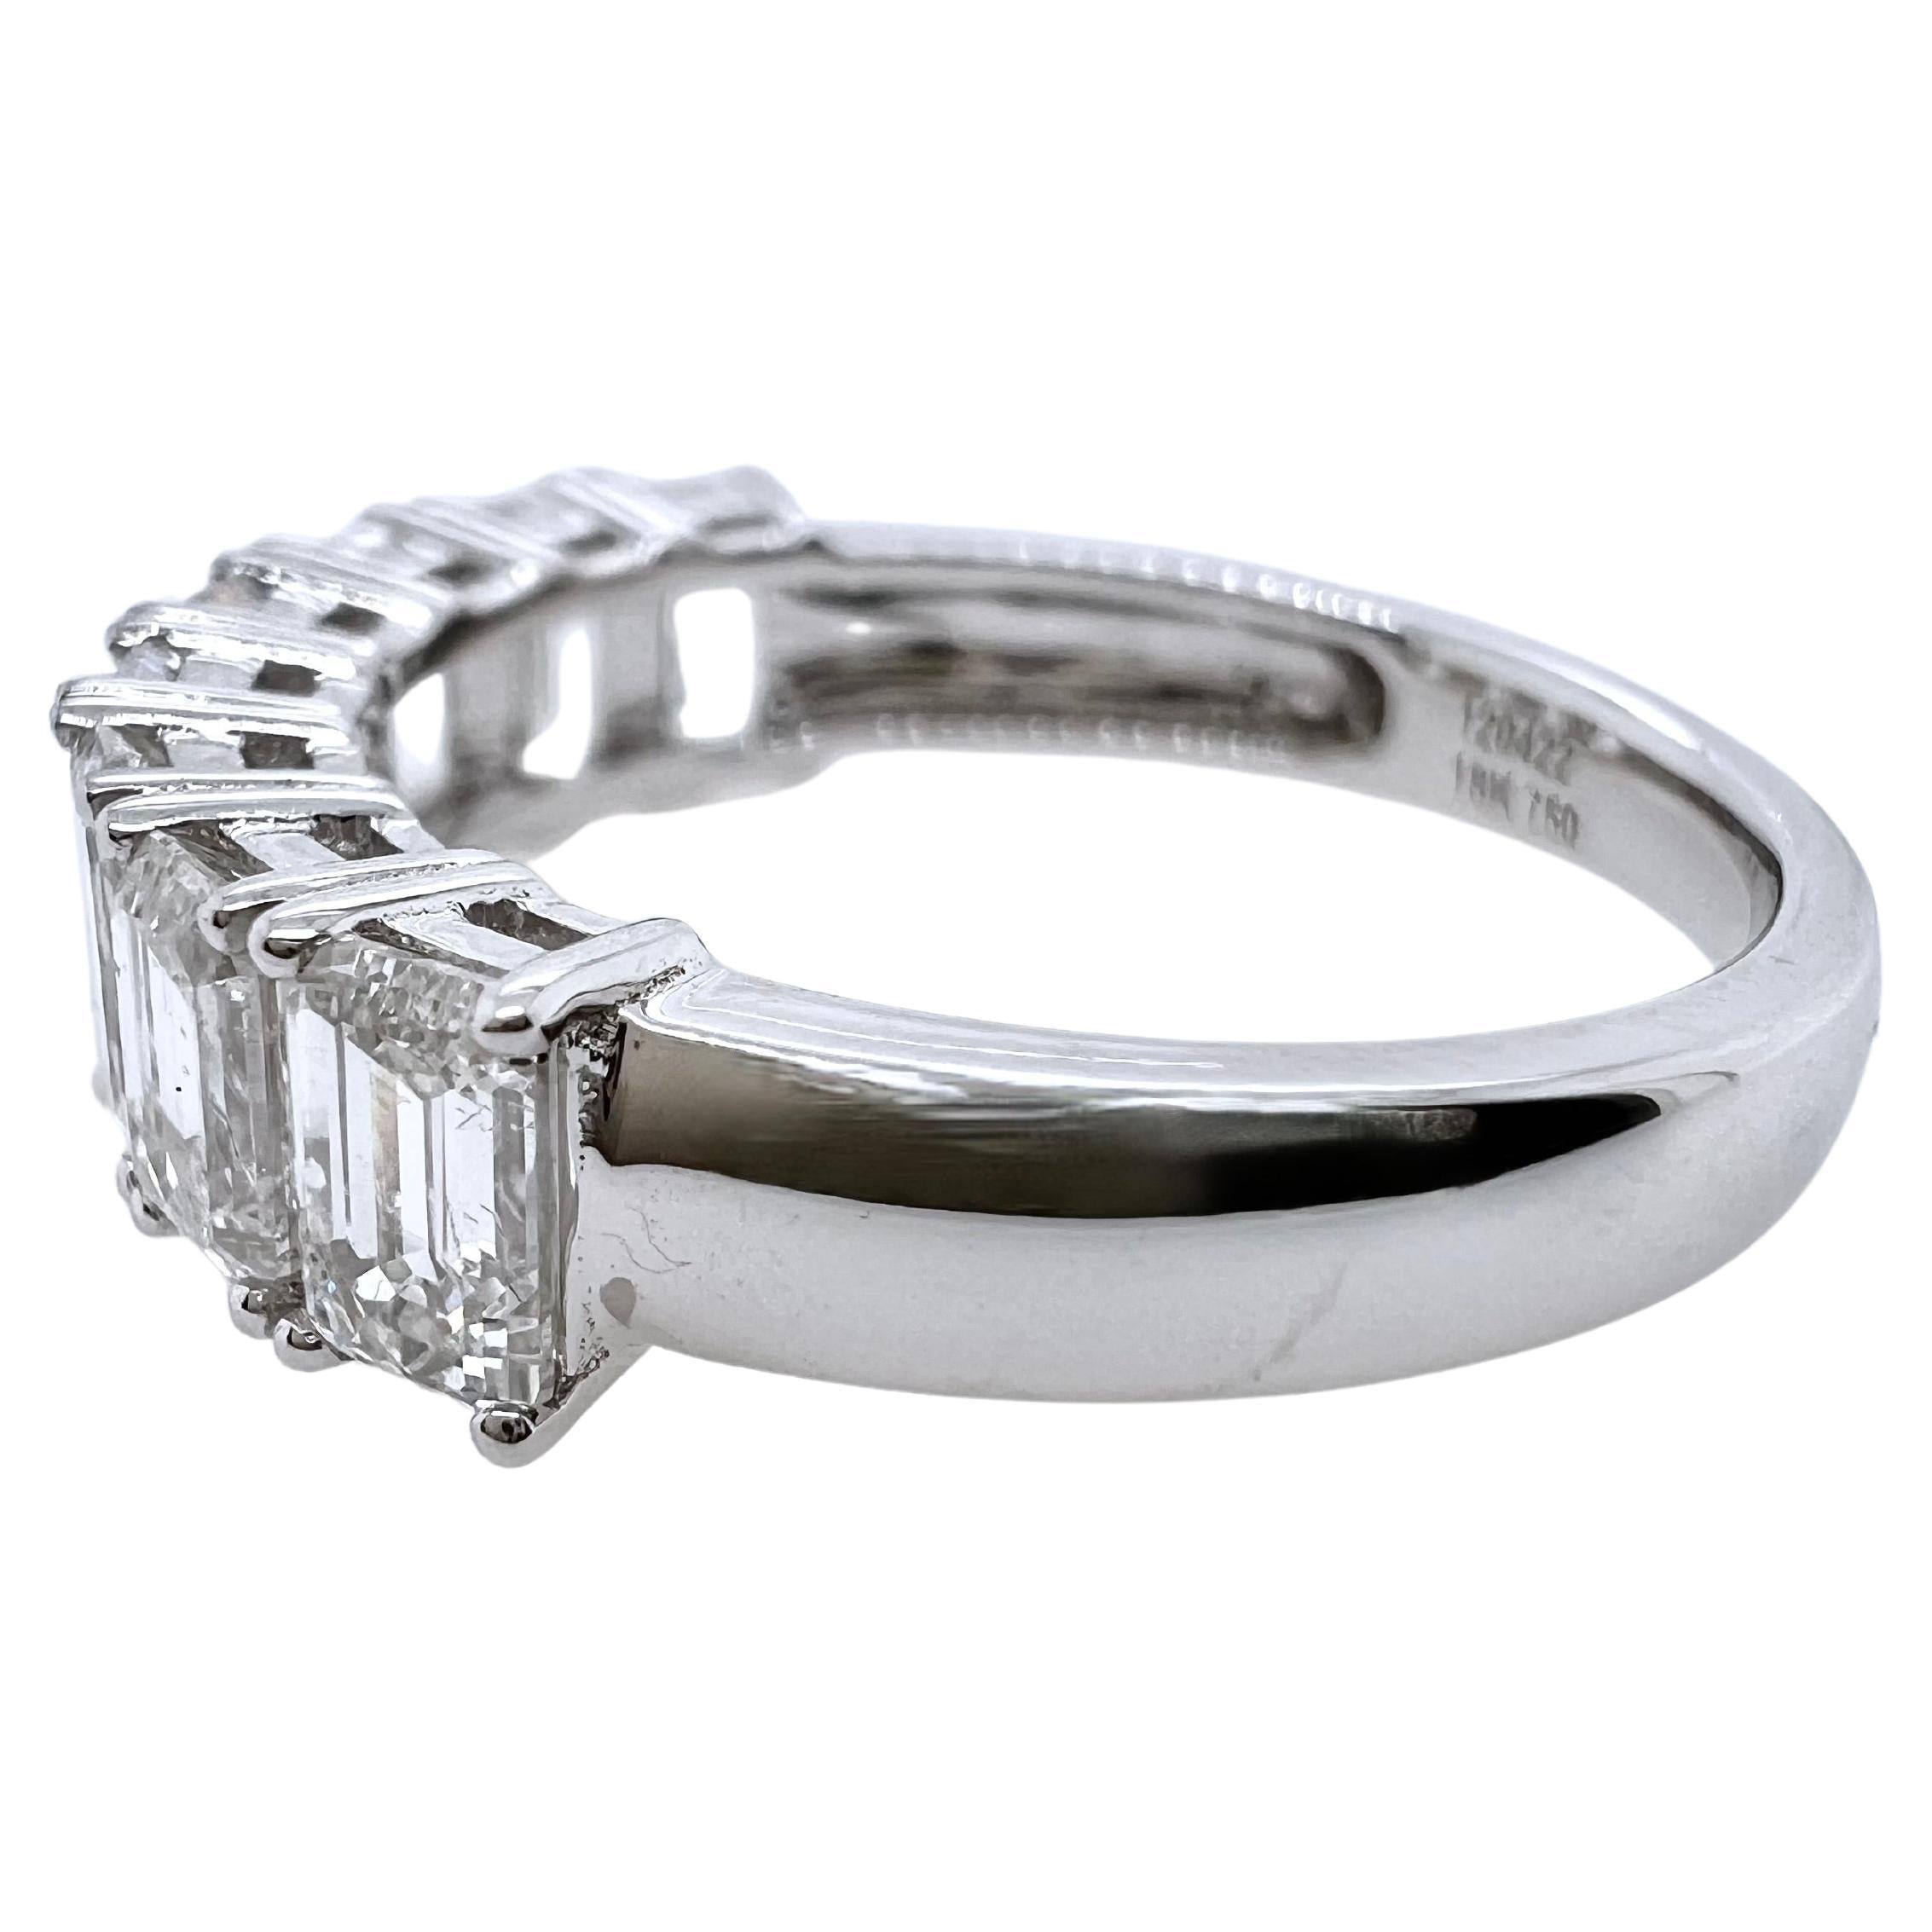 This classic emerald cut diamond band is timeless and stunning.  The 8 emerald cut diamonds are set in a straight
row to exhibit a clean, elegant look.  This is the ideal band to be worn alone or stacked with other rings!



Size: 6.5 (can be